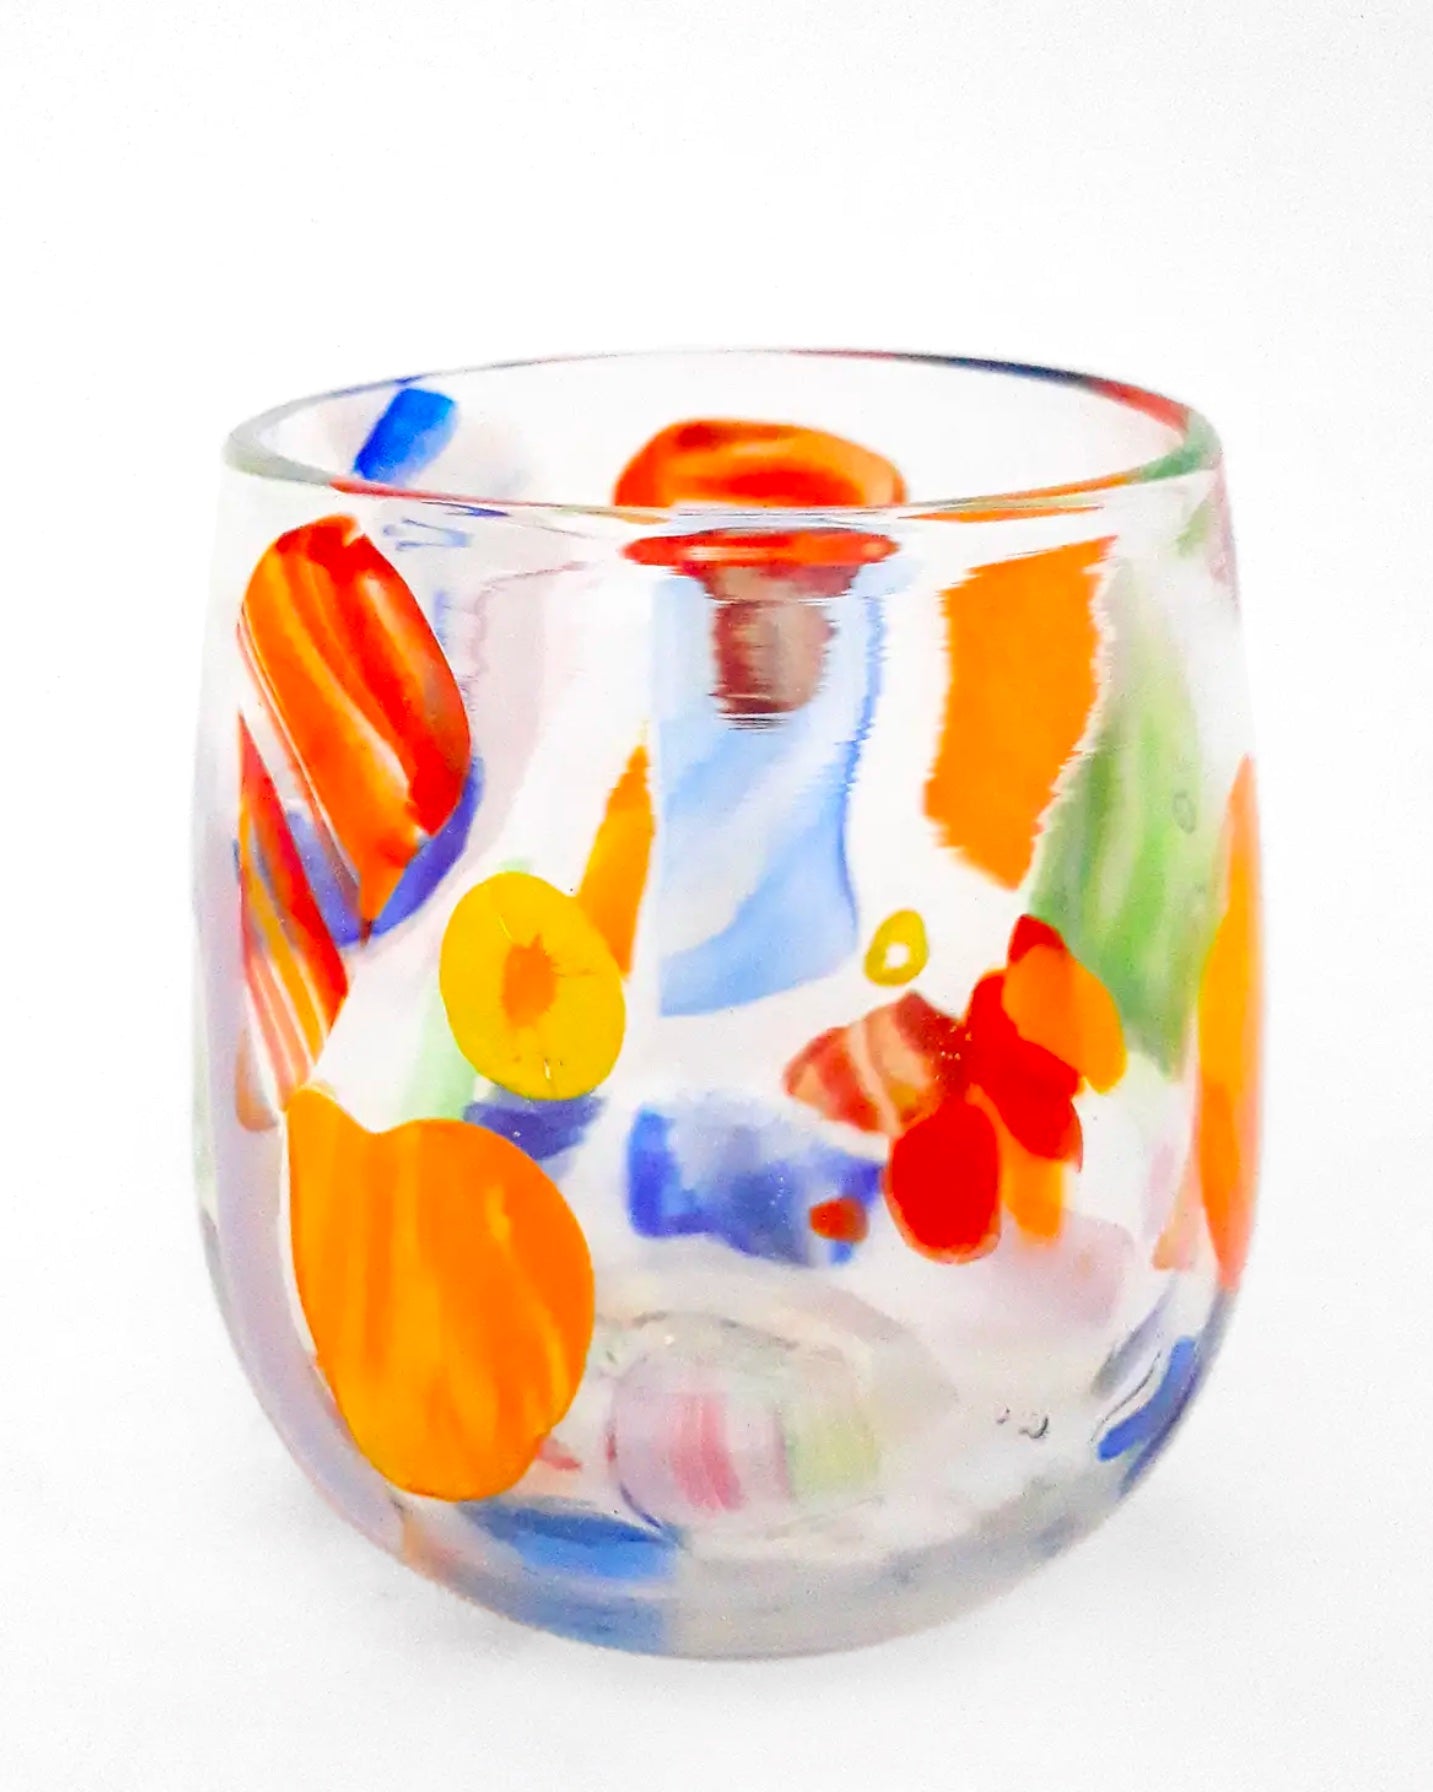 Stemless Wine Glasses in Rainbow Colors. Hand Blown Glass Cocktail